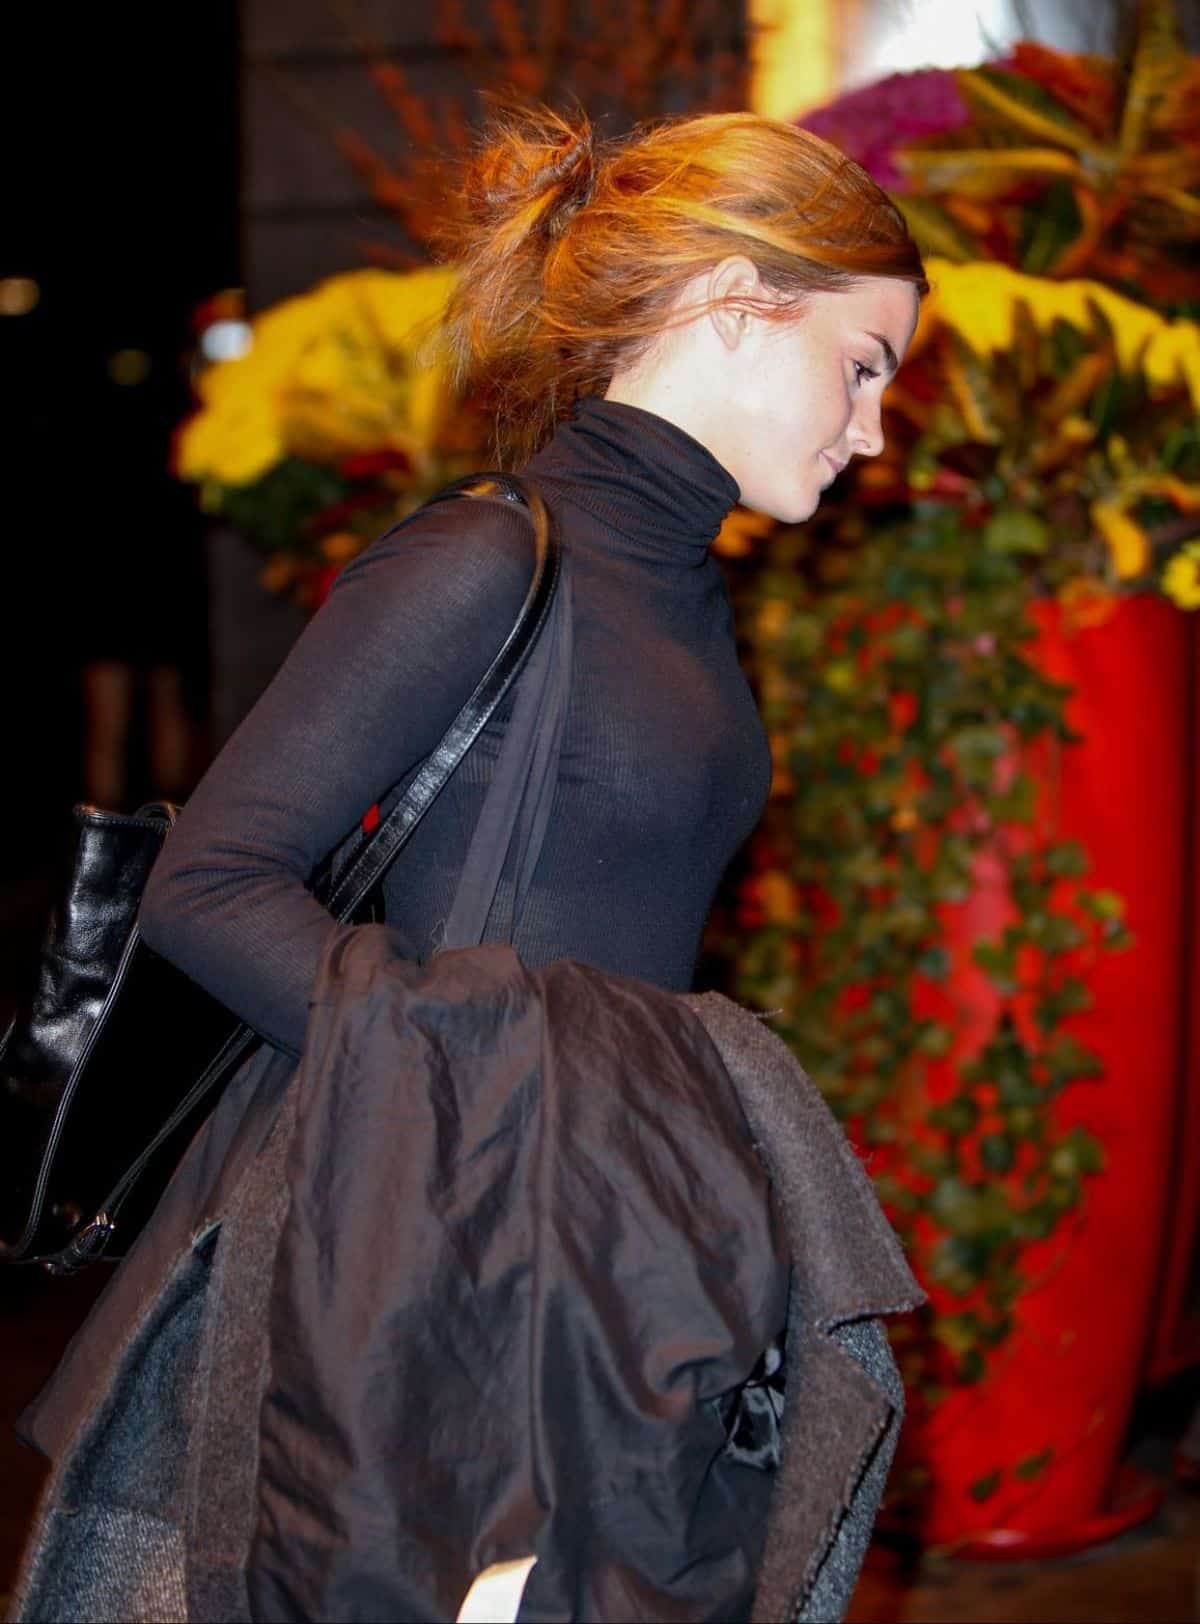 Emma Watson Looks Fantastic in a Sheer Black Top Heading to the Restaurant in NY